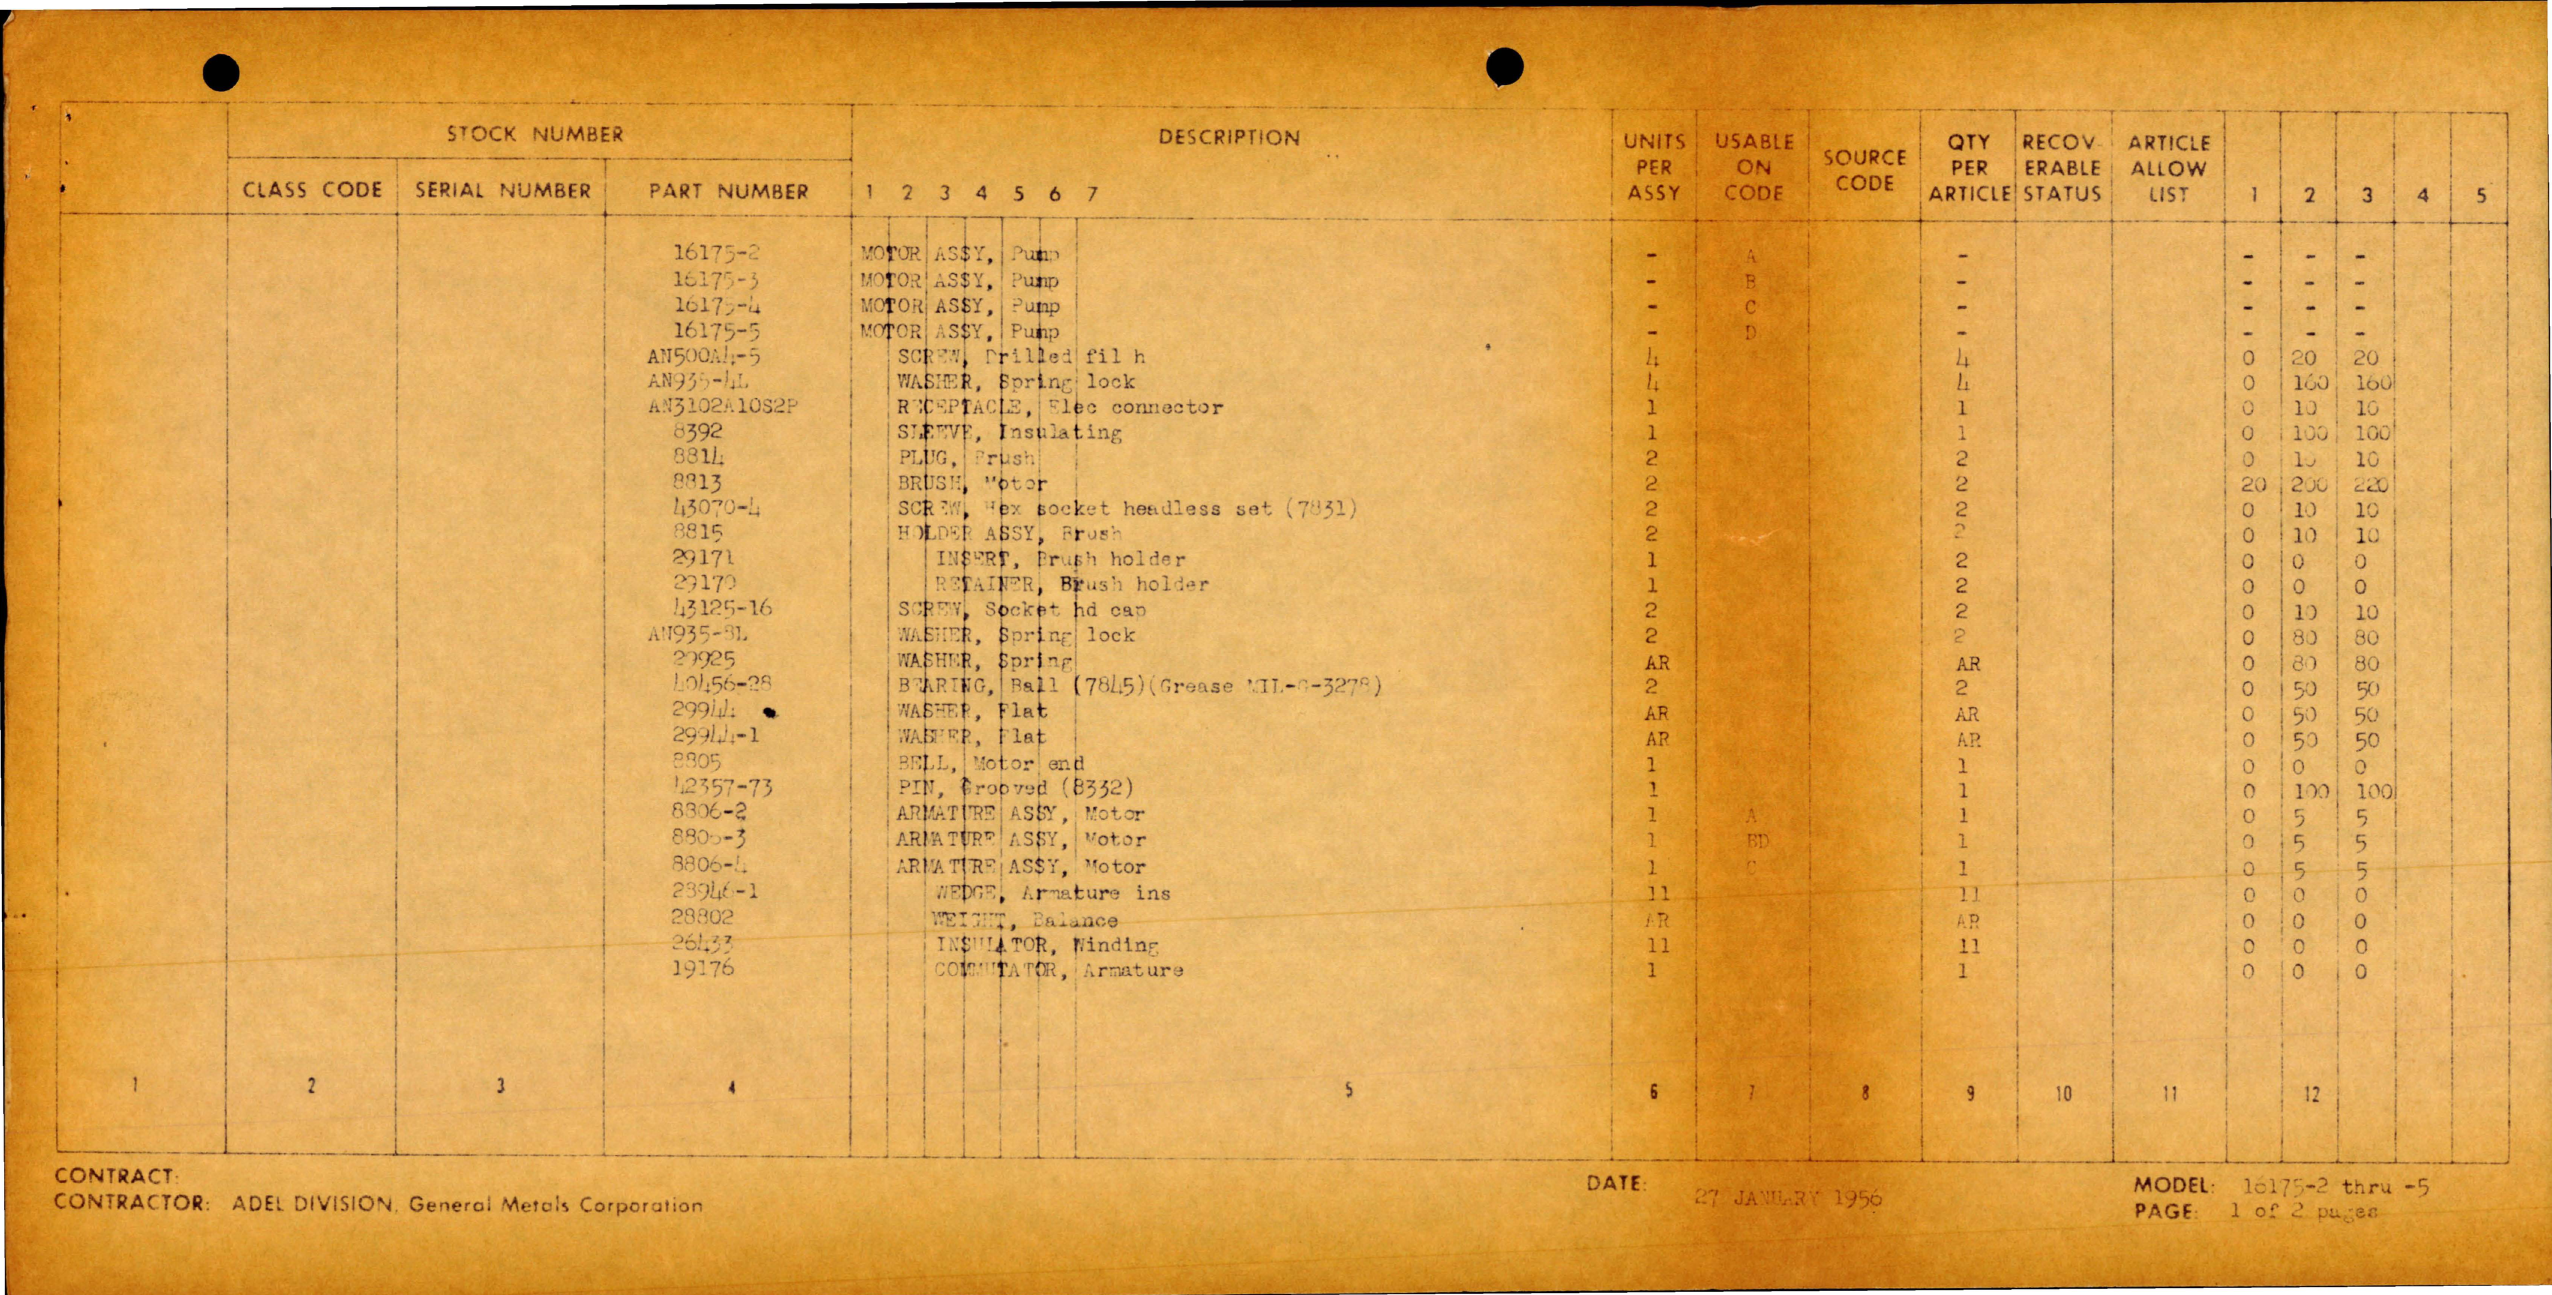 Sample page 1 from AirCorps Library document: Parts List for Motor Assembly Pump - Models 16175-2 thru 16175-5